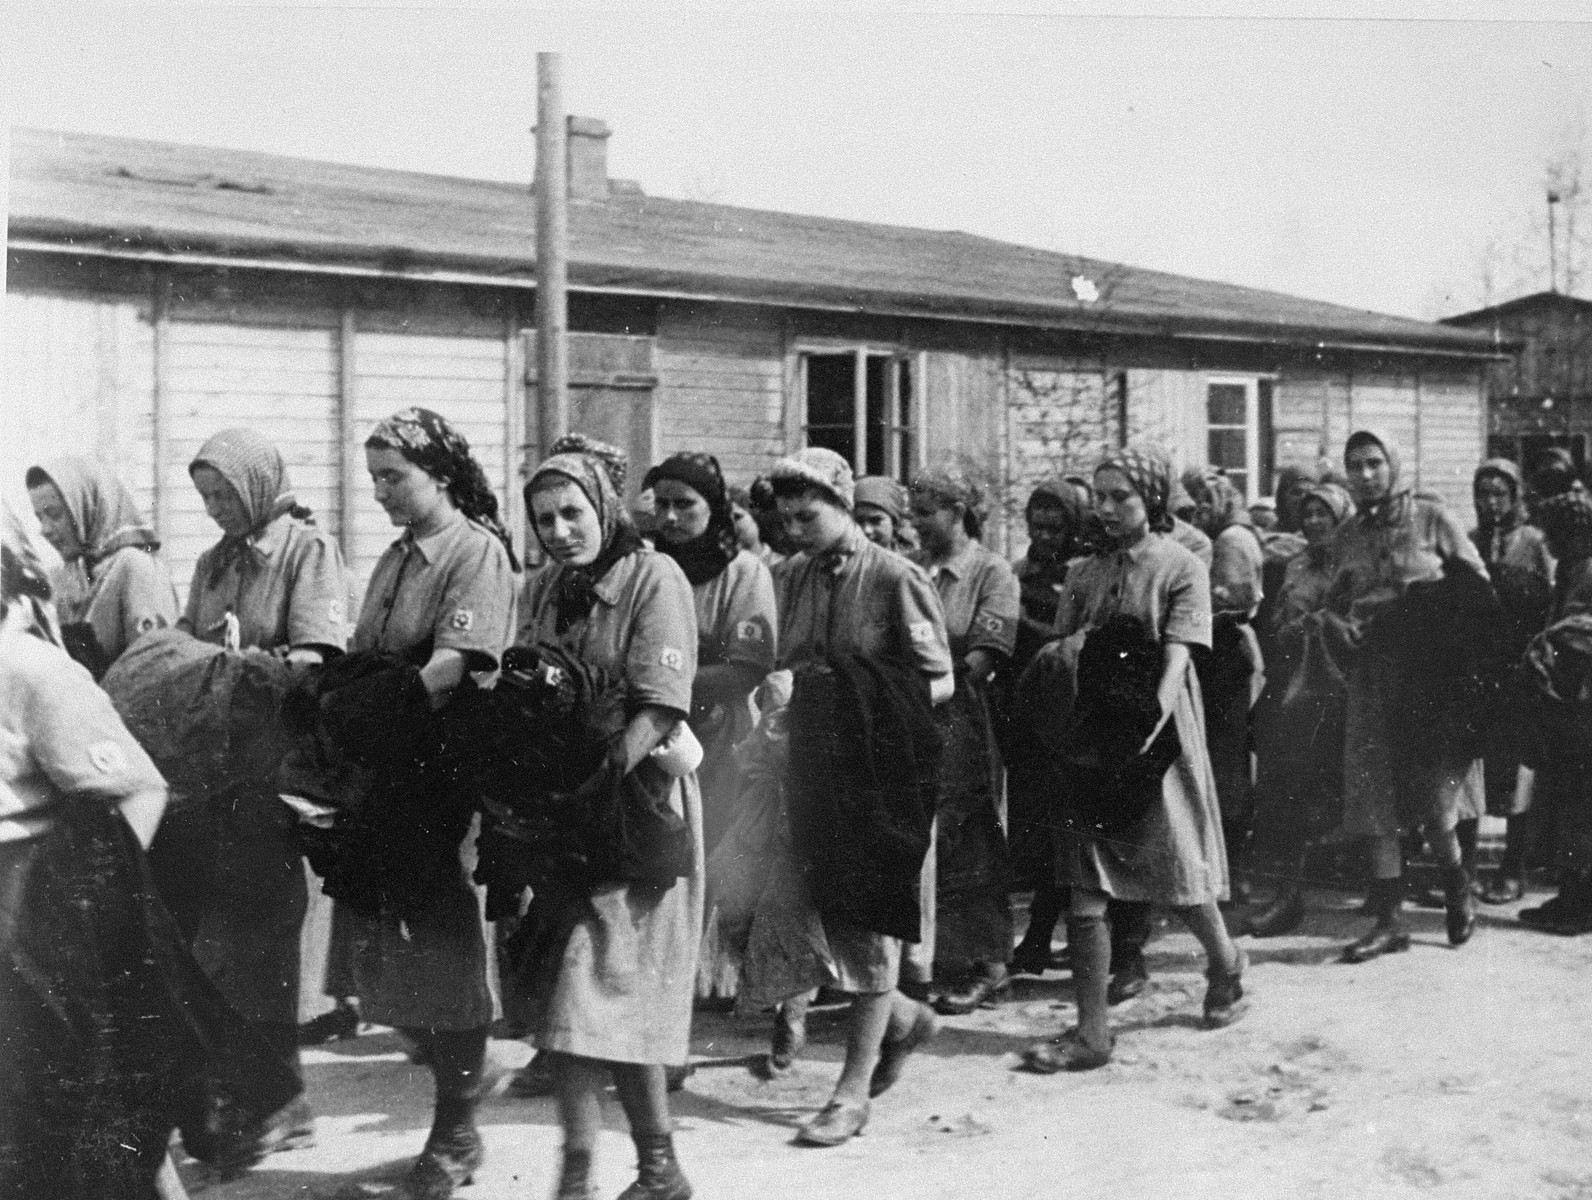 Jewish women from Subcarpathian Rus who have been selected for forced labor at Auschwitz-Birkenau, march toward their barracks after disinfection and headshaving.

Among those pictured from left to right are Martha Birnbaum Younger, Dora Birnbaum, Erna Birnbaum Gottesman, Gina Liebermann or Etush Zelmanovic (later Esther Moses),  Agi Katz Rubin, and Mignon Gottesman (now Bretzholz), Maidi Birnbaum and Rozi Feldman.